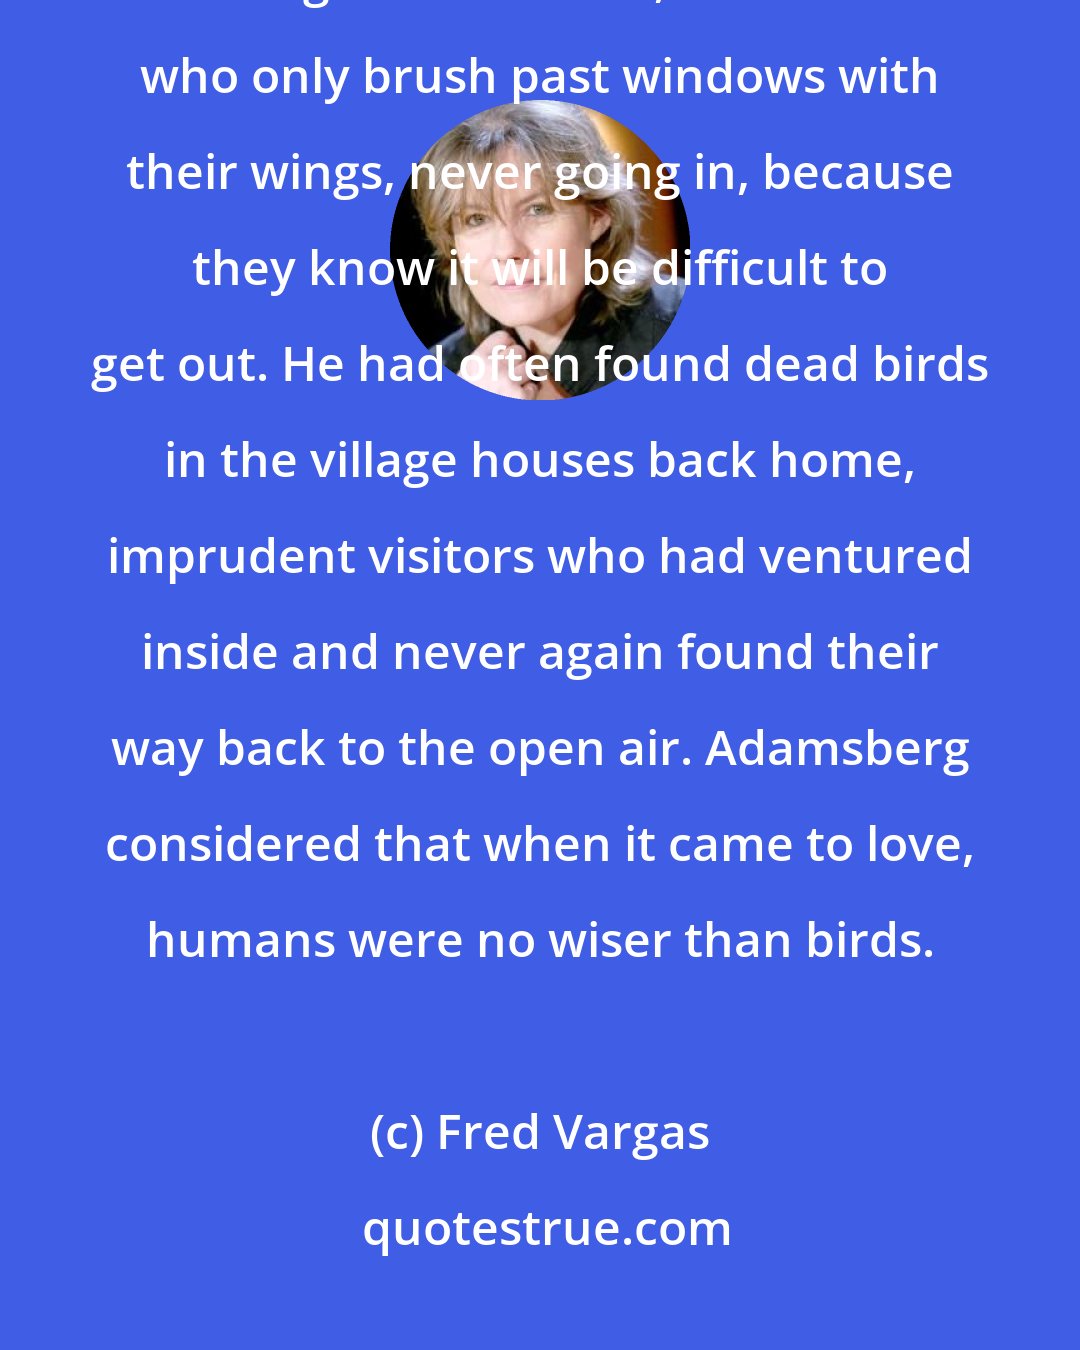 Fred Vargas: ADAMSBERG WAS NOT A MAN WHO WENT IN FOR EMOTION: he skirted around strong feelings with caution, like swifts who only brush past windows with their wings, never going in, because they know it will be difficult to get out. He had often found dead birds in the village houses back home, imprudent visitors who had ventured inside and never again found their way back to the open air. Adamsberg considered that when it came to love, humans were no wiser than birds.